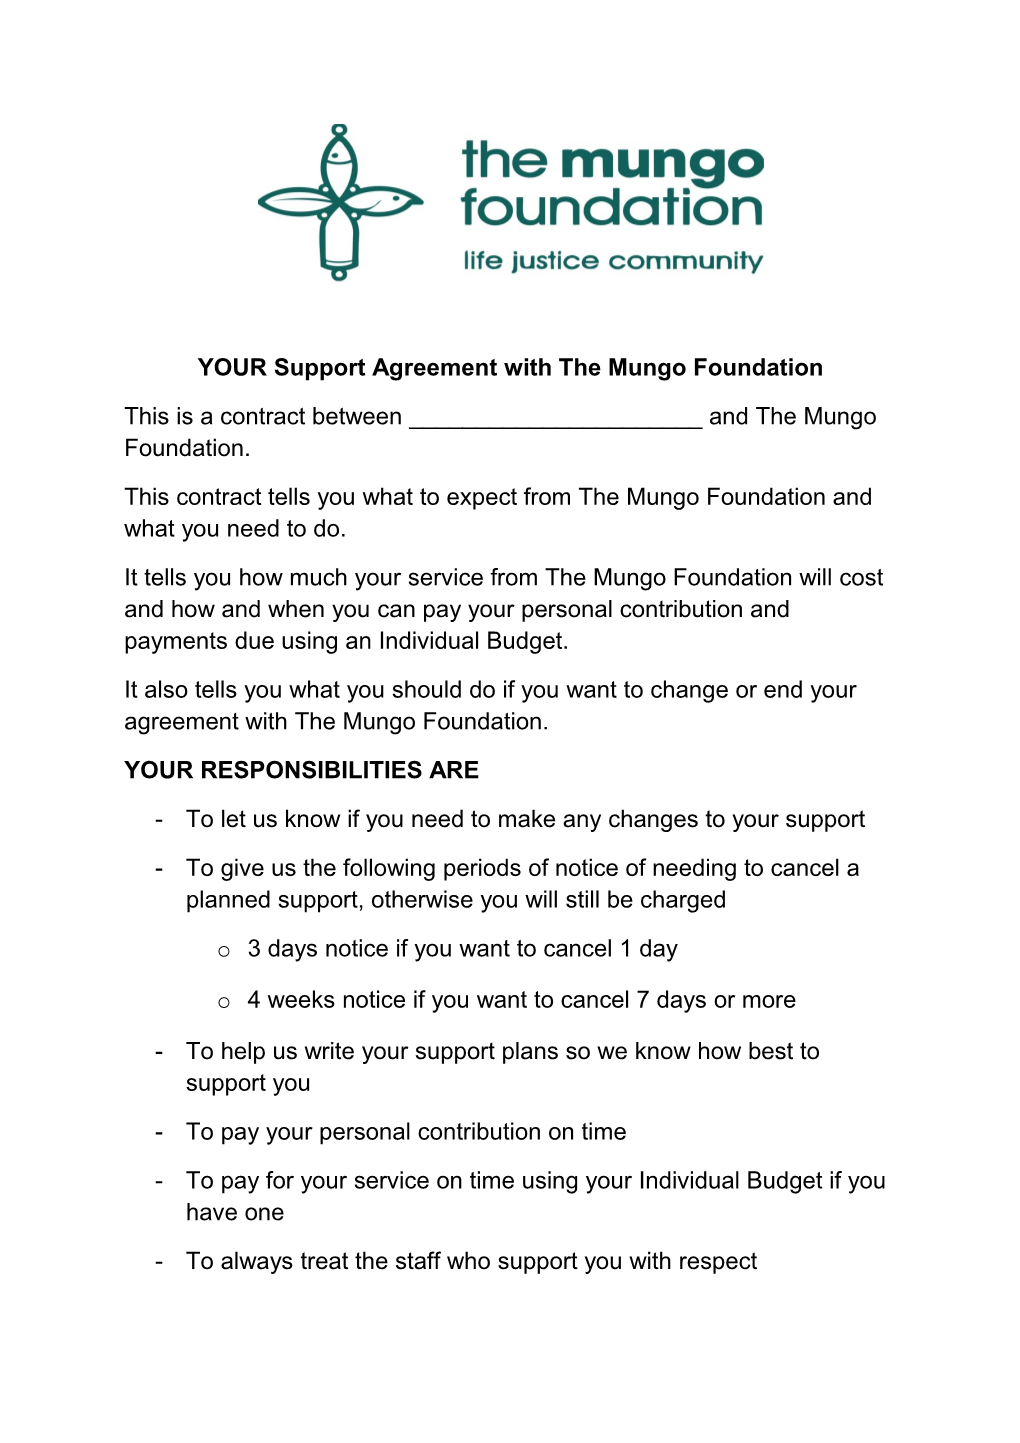 YOUR Support Agreement with the Mungo Foundation